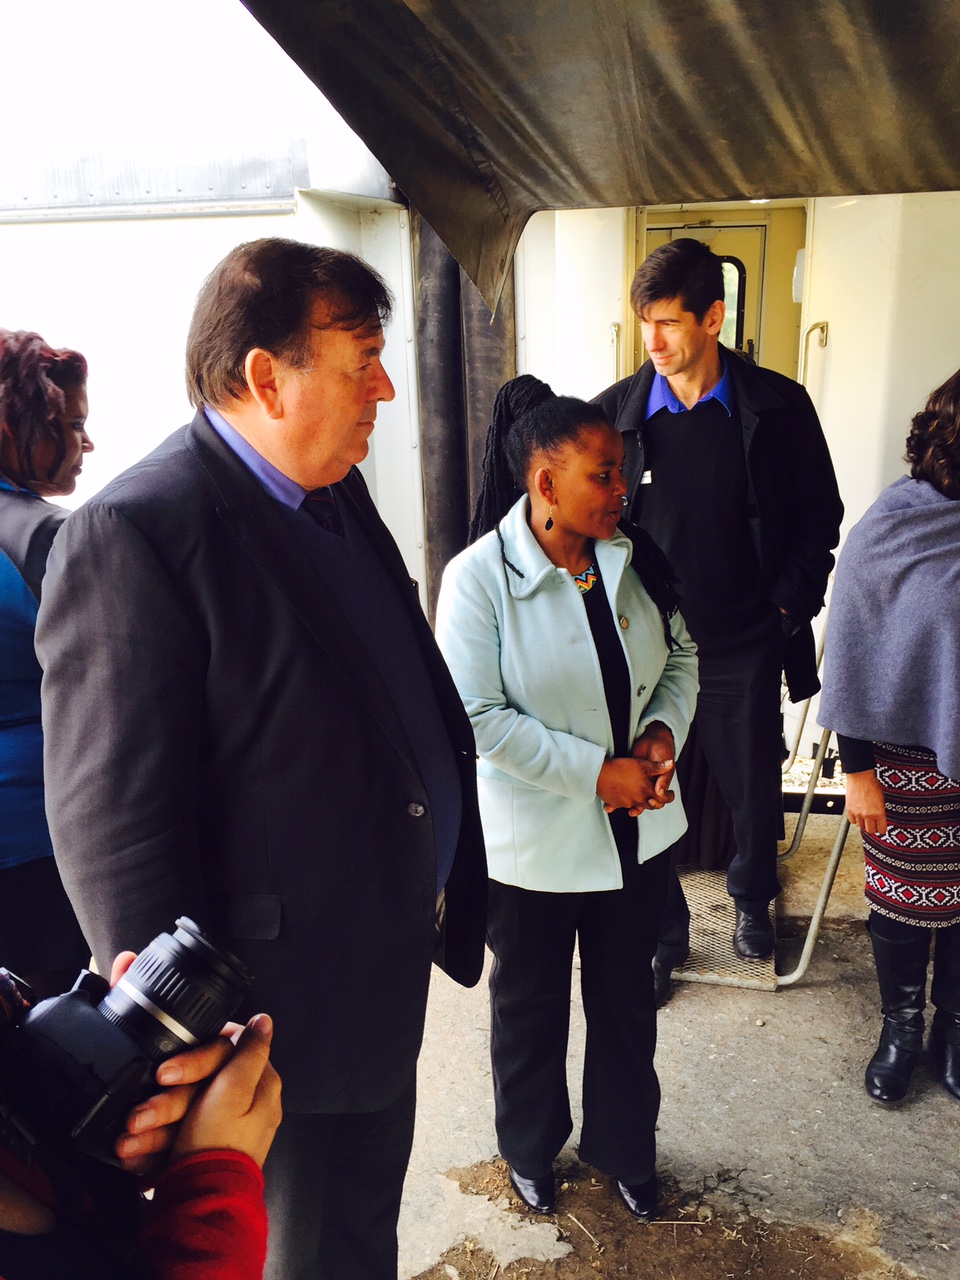 Minister Grant and Minister Mbombo at the Phelophepa train, where it is currently stationed in De Doorns.